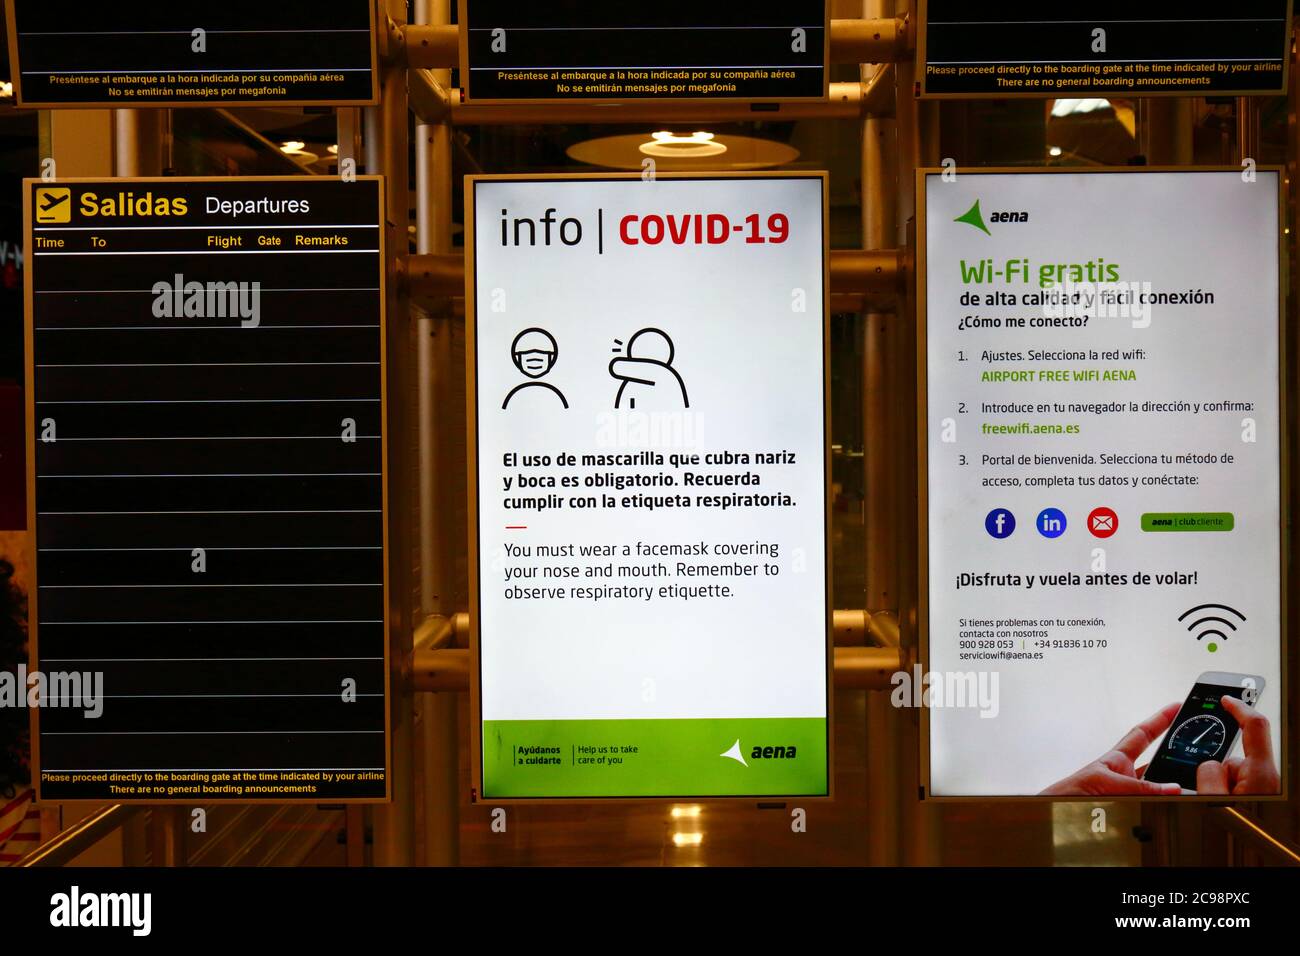 28th July 2020, Barajas Airport, Madrid, Spain: A Covid-19 information sign and empty flight departure board in the departure lounge area of the Terminal 4S building of Barajas Airport. Reduced numbers of flights are now operating between European countries after the lockdown to control the covid-19 coronavirus, and governments have put a system of air bridges in place to facilitate travel and tourism. Spain has seen a number of new outbreaks in recent days, prompting the UK government to announce that people returning to the UK from Spain should quarantine for 14 days on arrival. Stock Photo